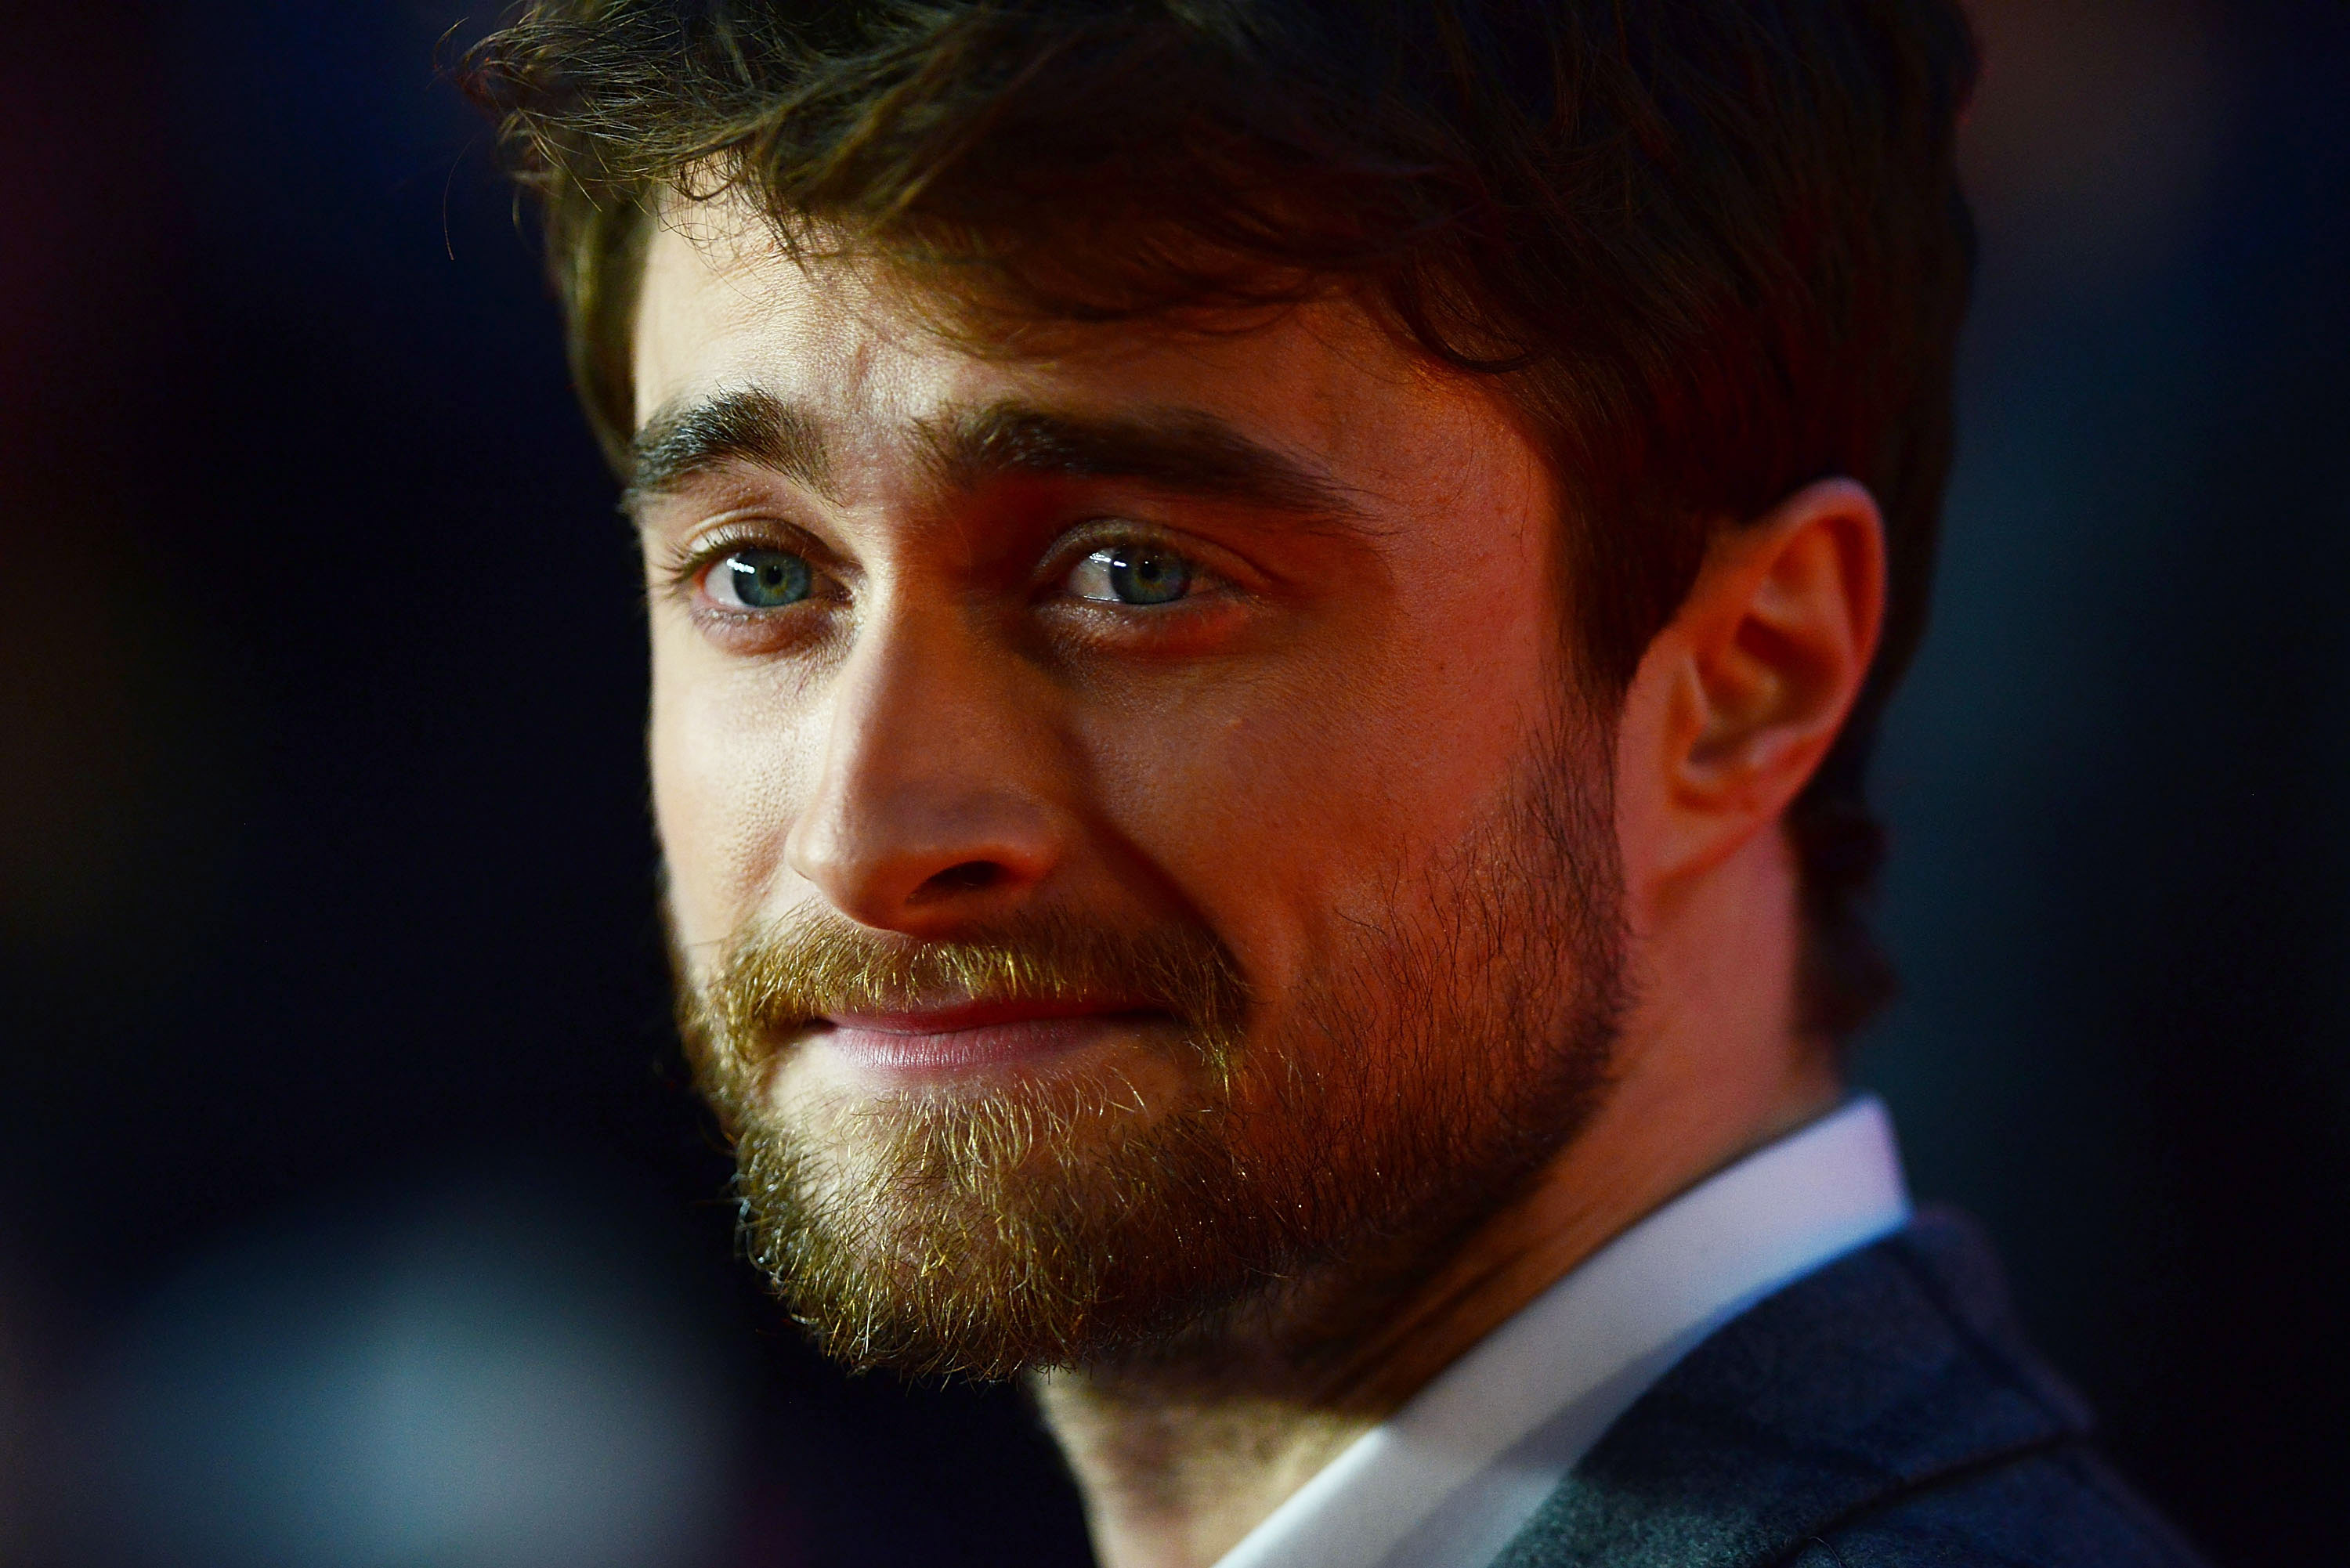 Daniel Radcliffe attends the UK Premiere of "Horns" at Odeon West End on Oct. 20, 2014 in London. (Dave J Hogan—WireImage)